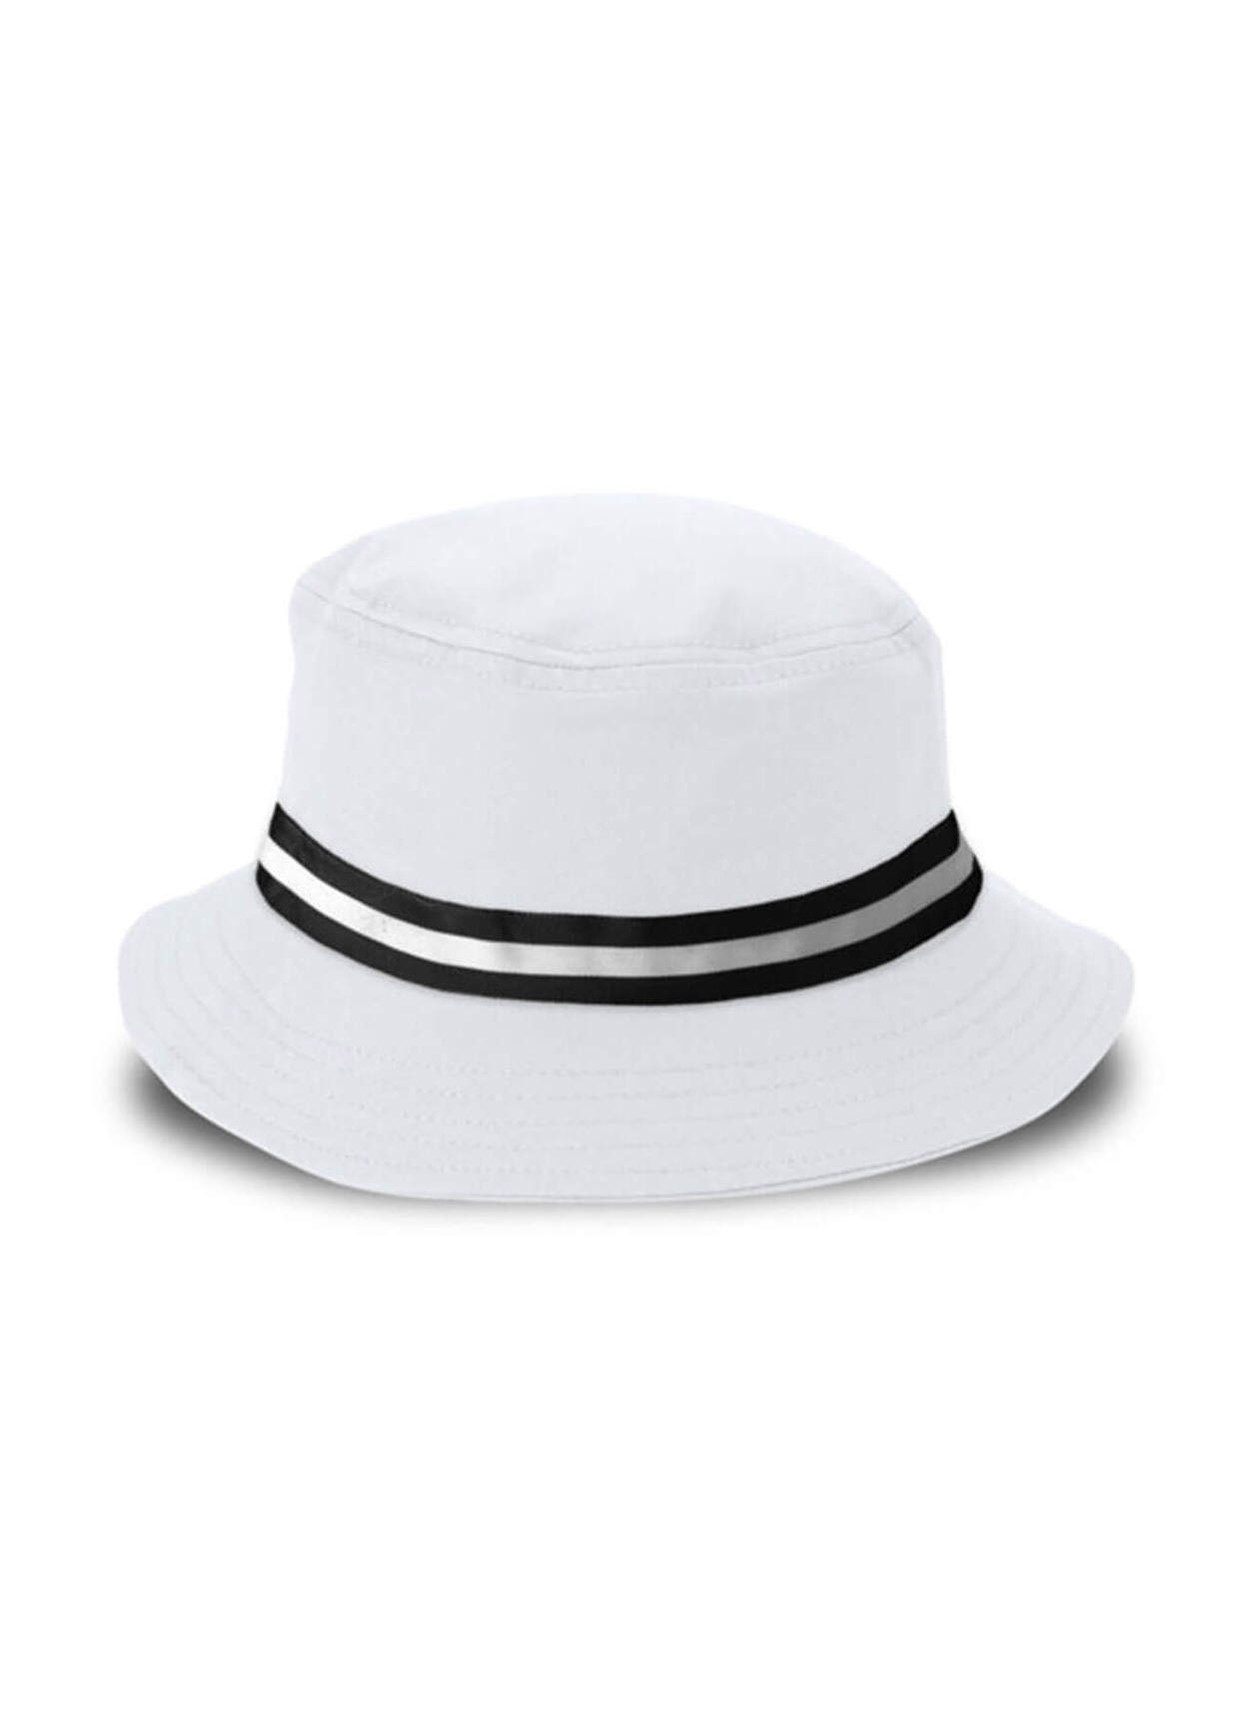 Imperial White / Black The Oxford Bucket Hat